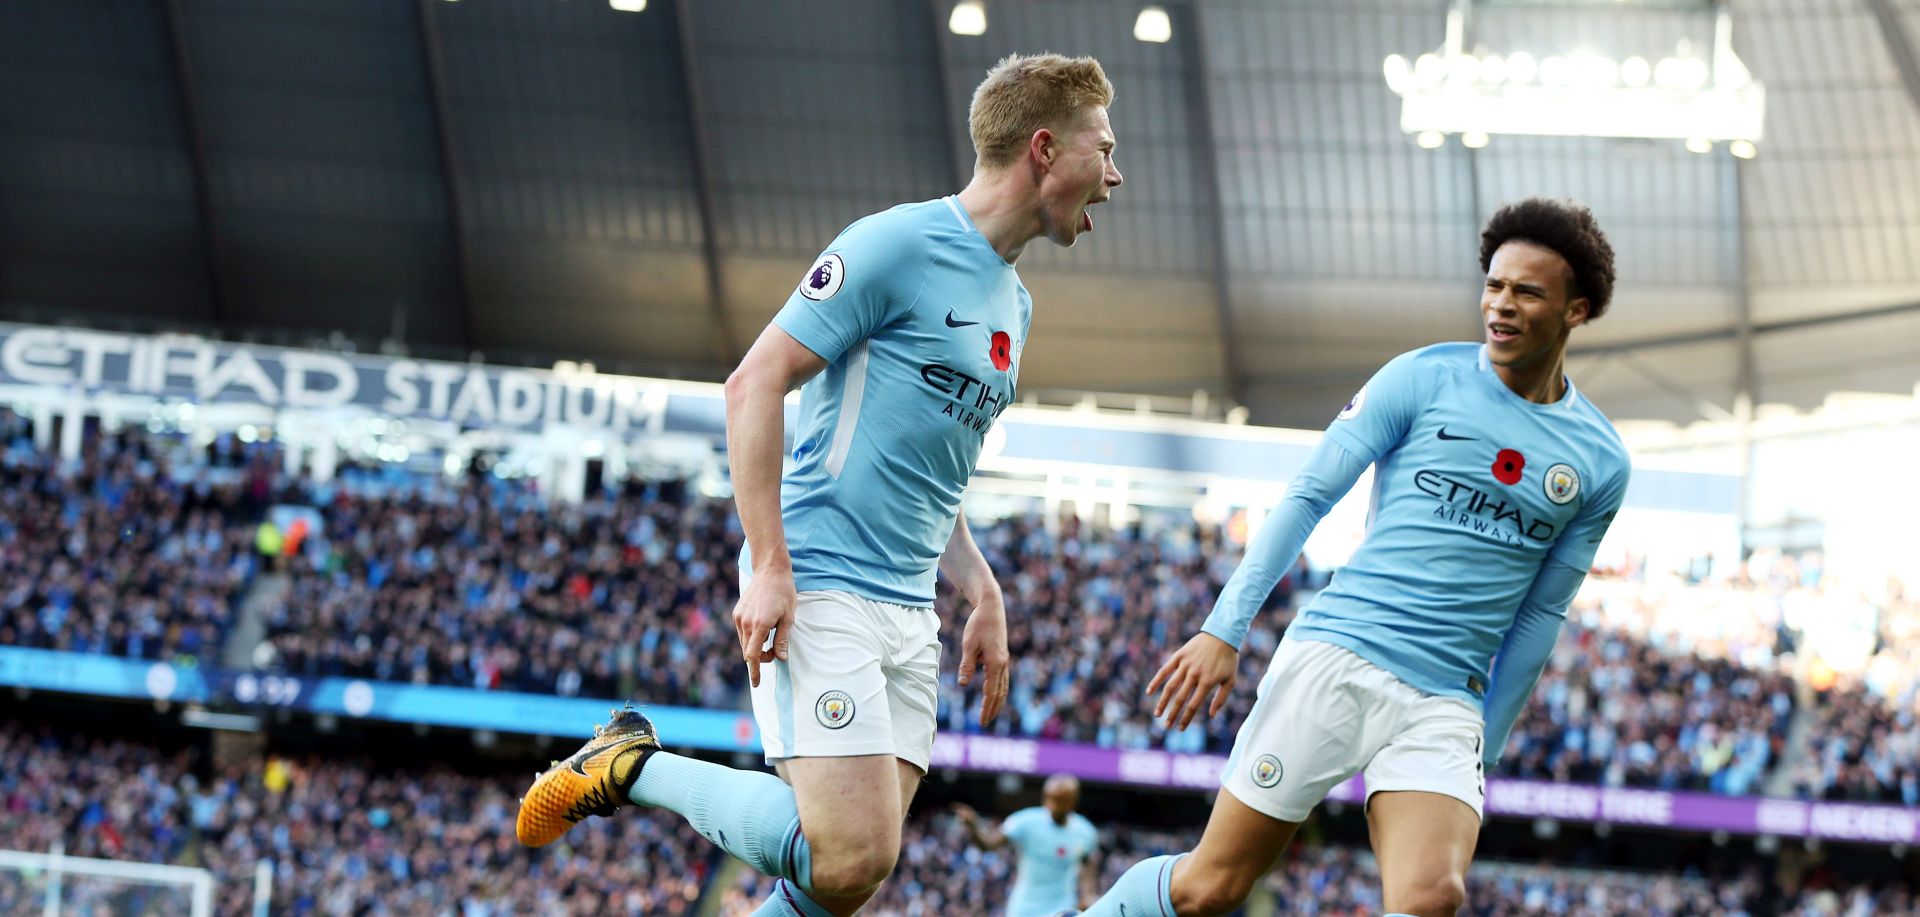 epa06309989 Kevin de Bruyne (L) of Manchester City celebrates with teammate Leroy Sane after scoring the opening goal during the English Premier League match between Manchester City and Arsenal at the Etihad Stadium in Manchester, Britain, 05 November 2017.  EPA/NIGEL RODDIS No use with unauthorised audio, video, data, fixture lists, club/league logos 'live' services. Online in-match use limited to 75 images, no video emulation. No use in betting, games or single club/league/player publications.  EDITORIAL USE ONLY  EDITORIAL  EDITORIAL USE ONLY